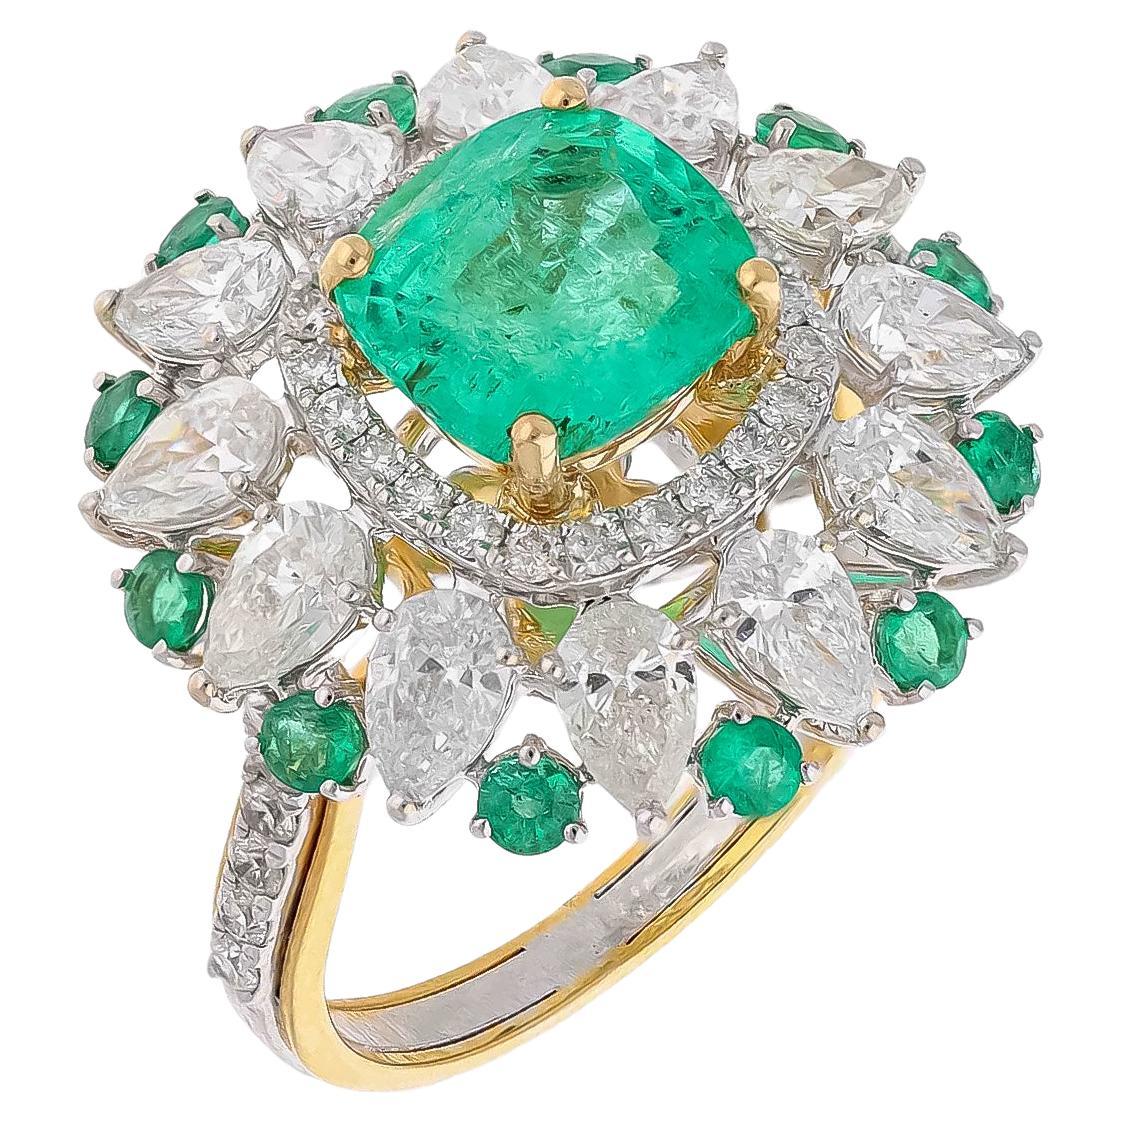 Natural Columbian Emerald Ring with Diamond in 18k Gold